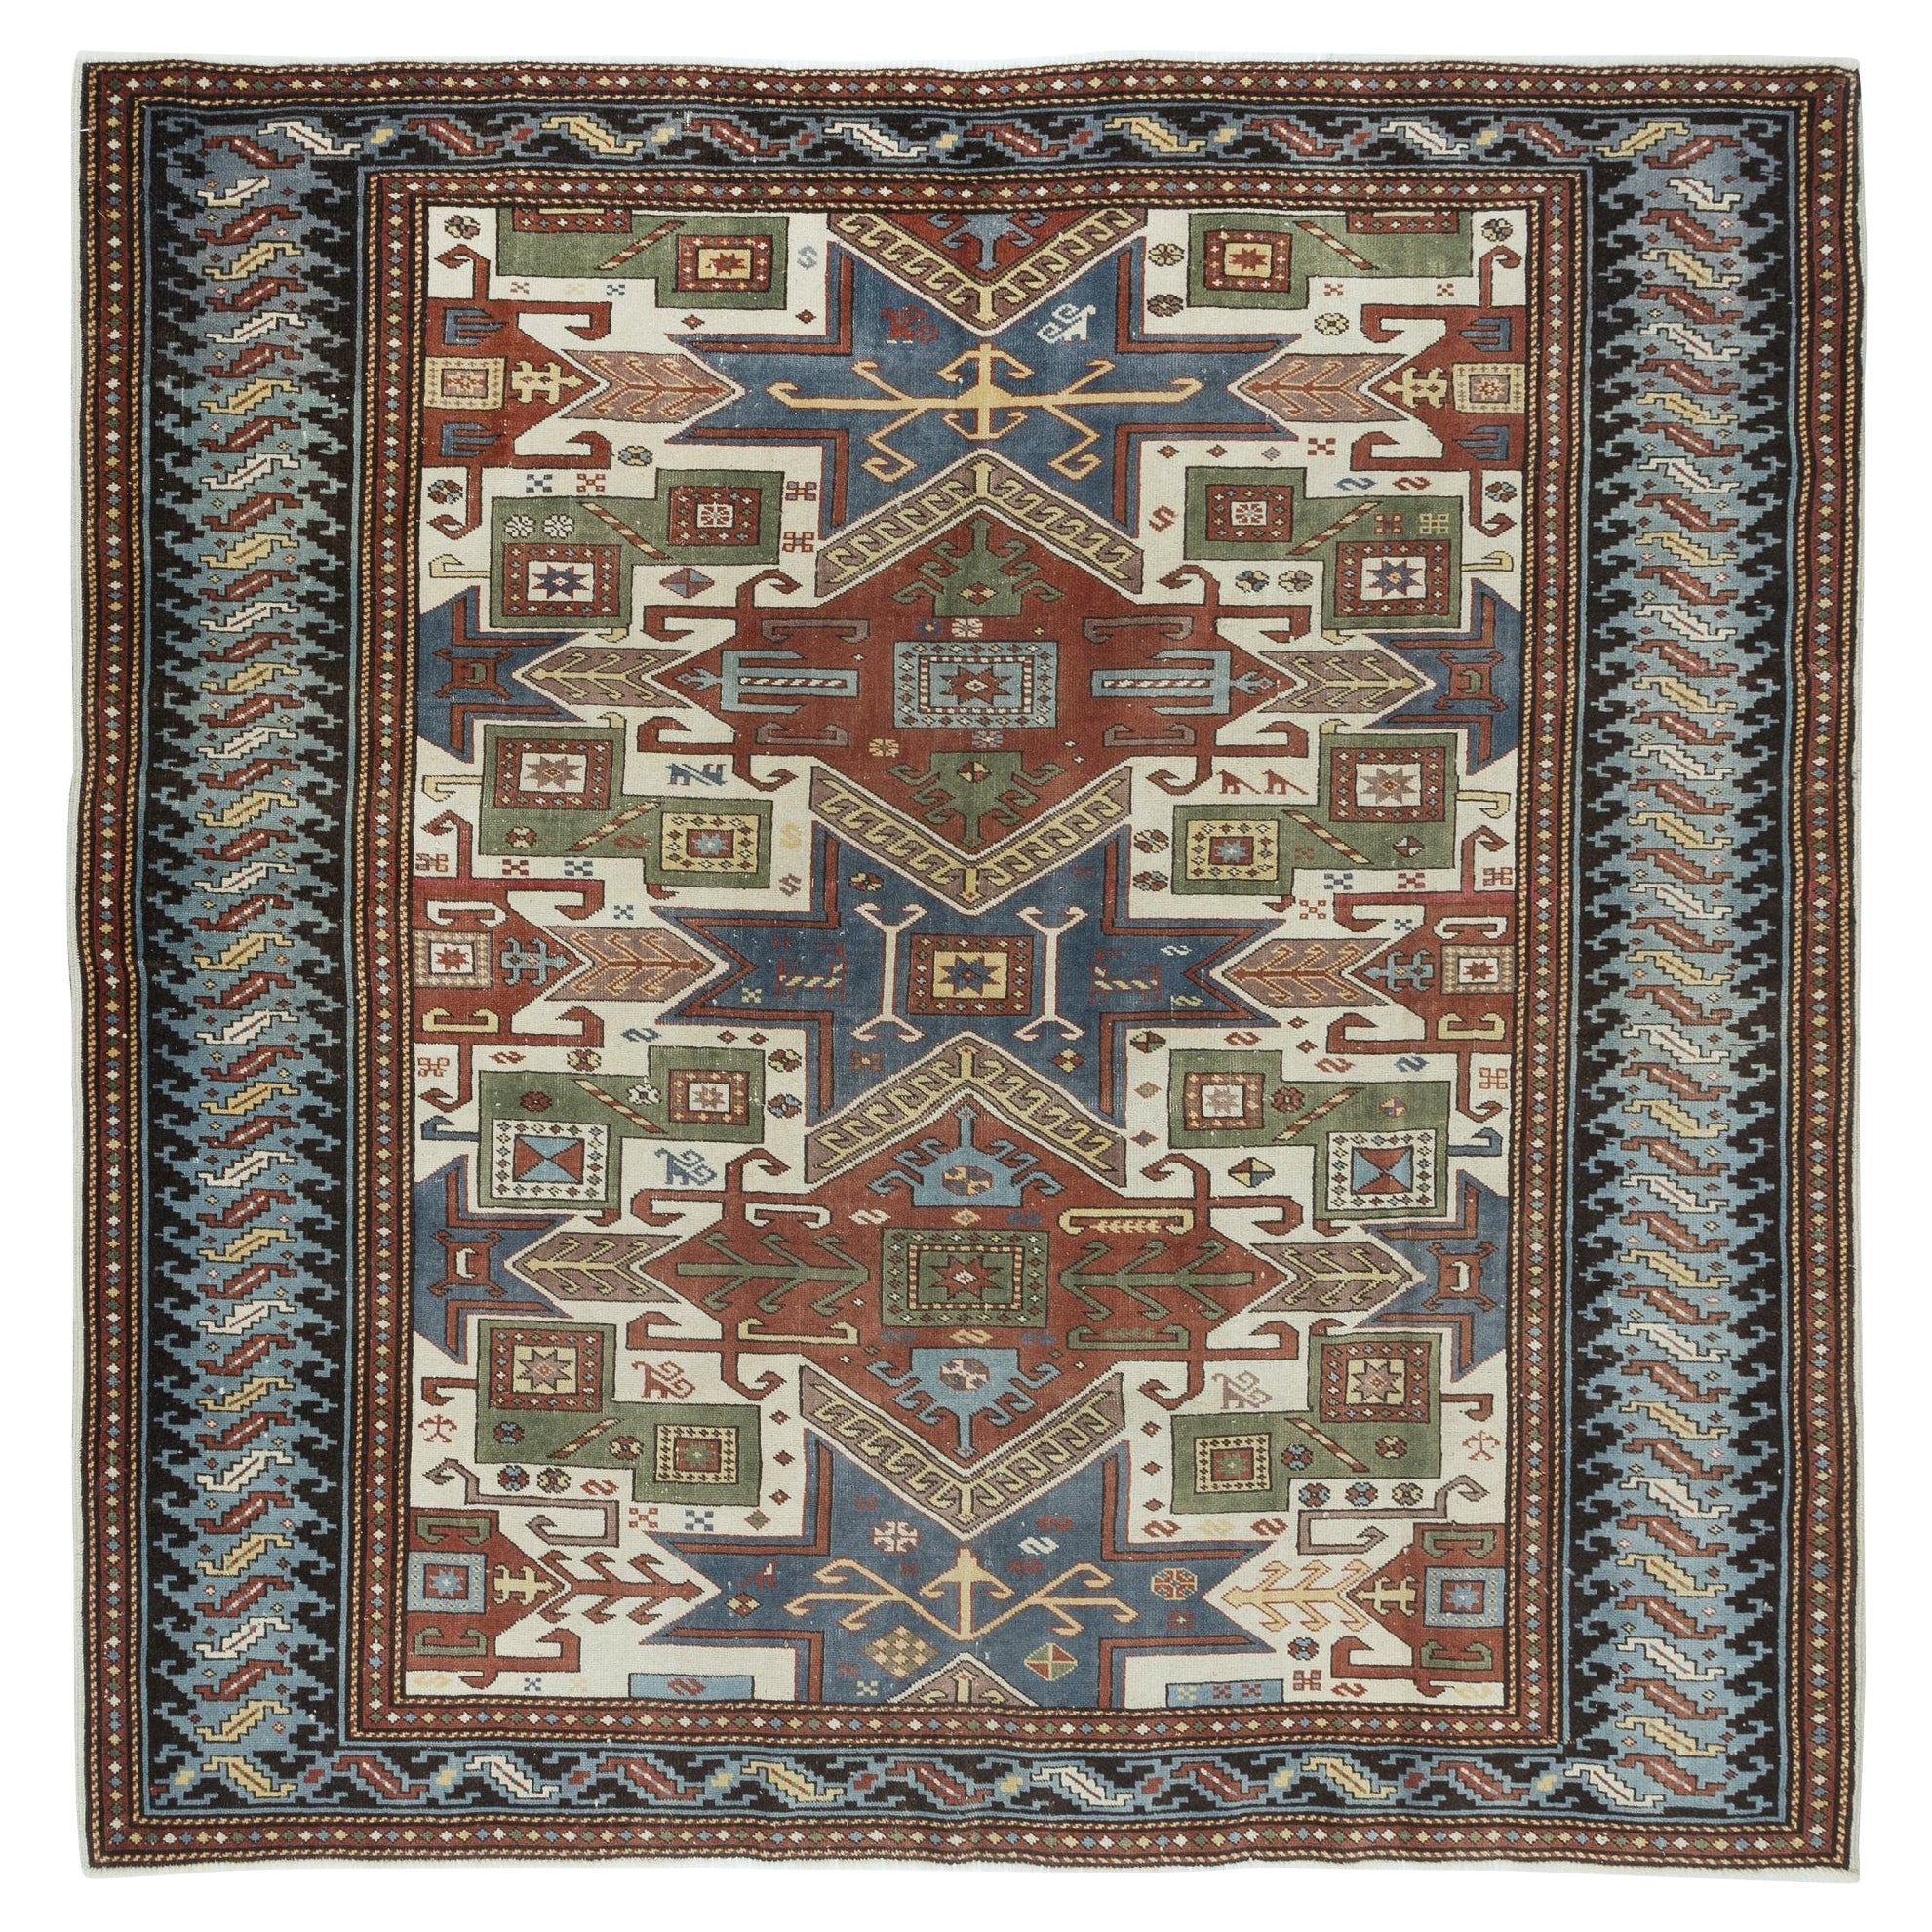 6.3x6.3 Ft Unique Vintage Hand Knotted Turkish Square Rug with Geometric Patters